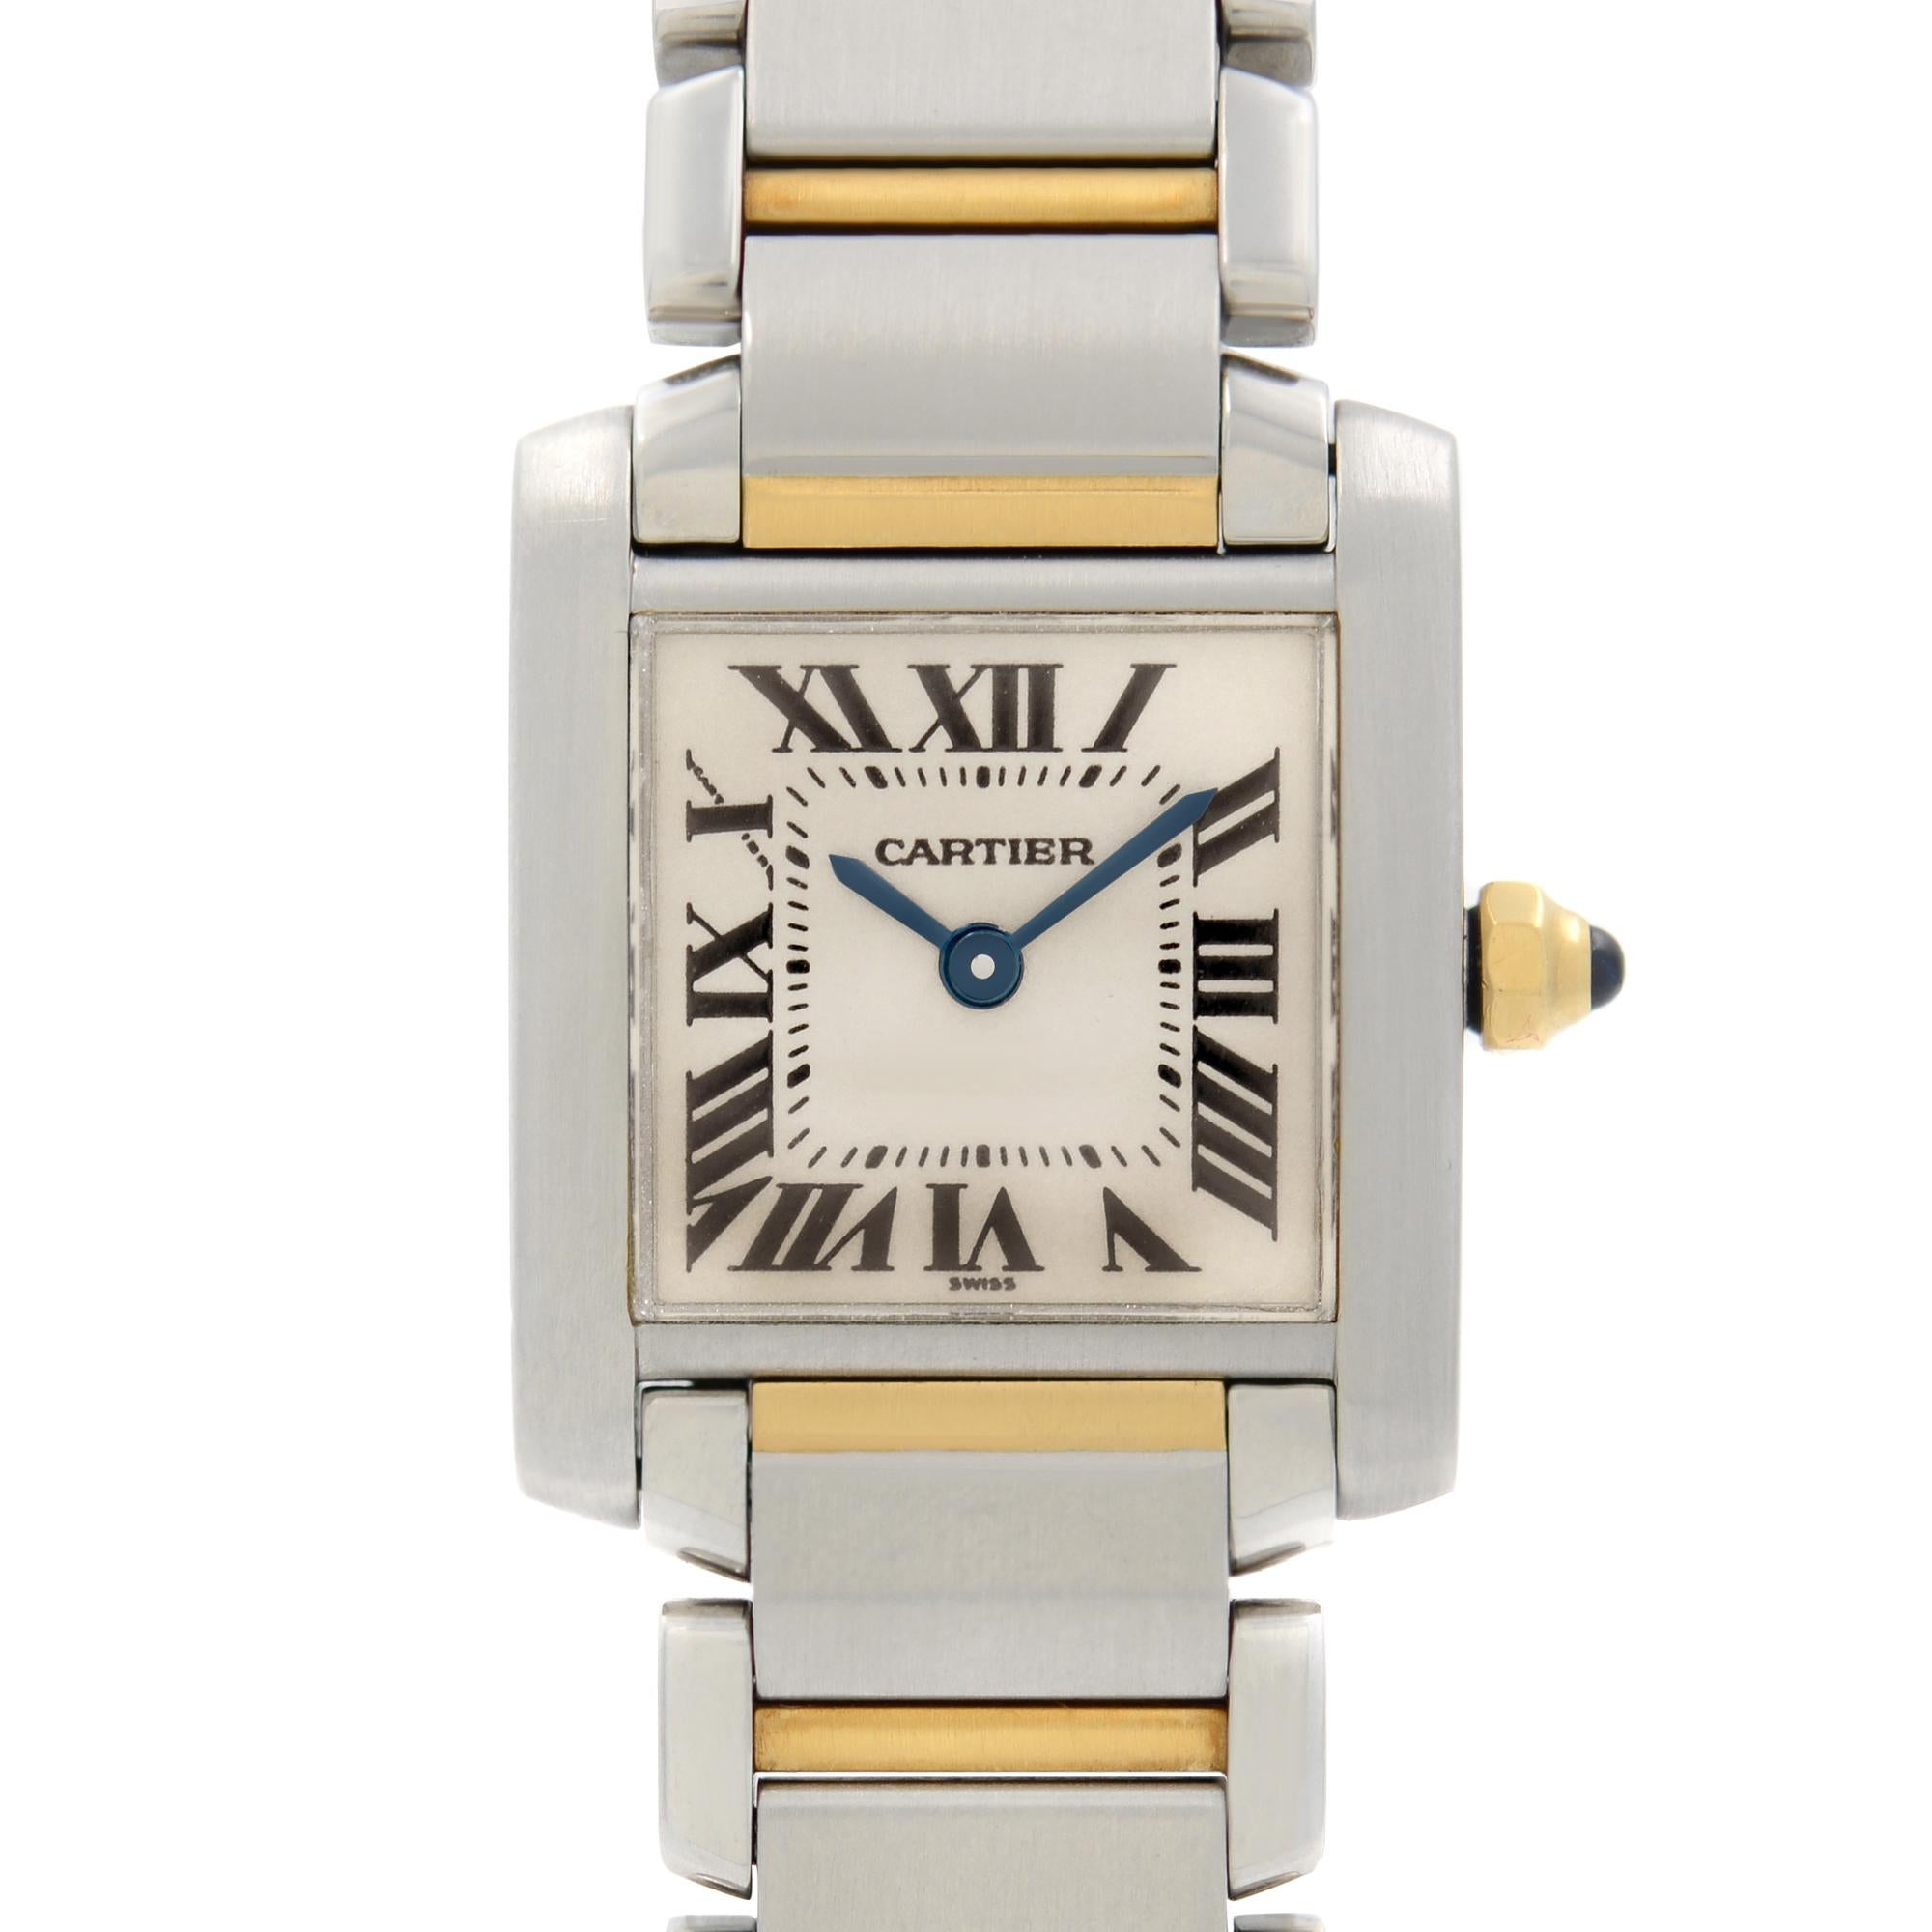 Preowned Cartier Tank 2384 Francaise 18K Gold Steel Quartz Ladies Watch W51007Q4. Band Shows Minor Wear Signs. Silver-tone stainless steel case with a silver-tone stainless steel bracelet. Fixed silver-tone stainless steel bezel. White dial with